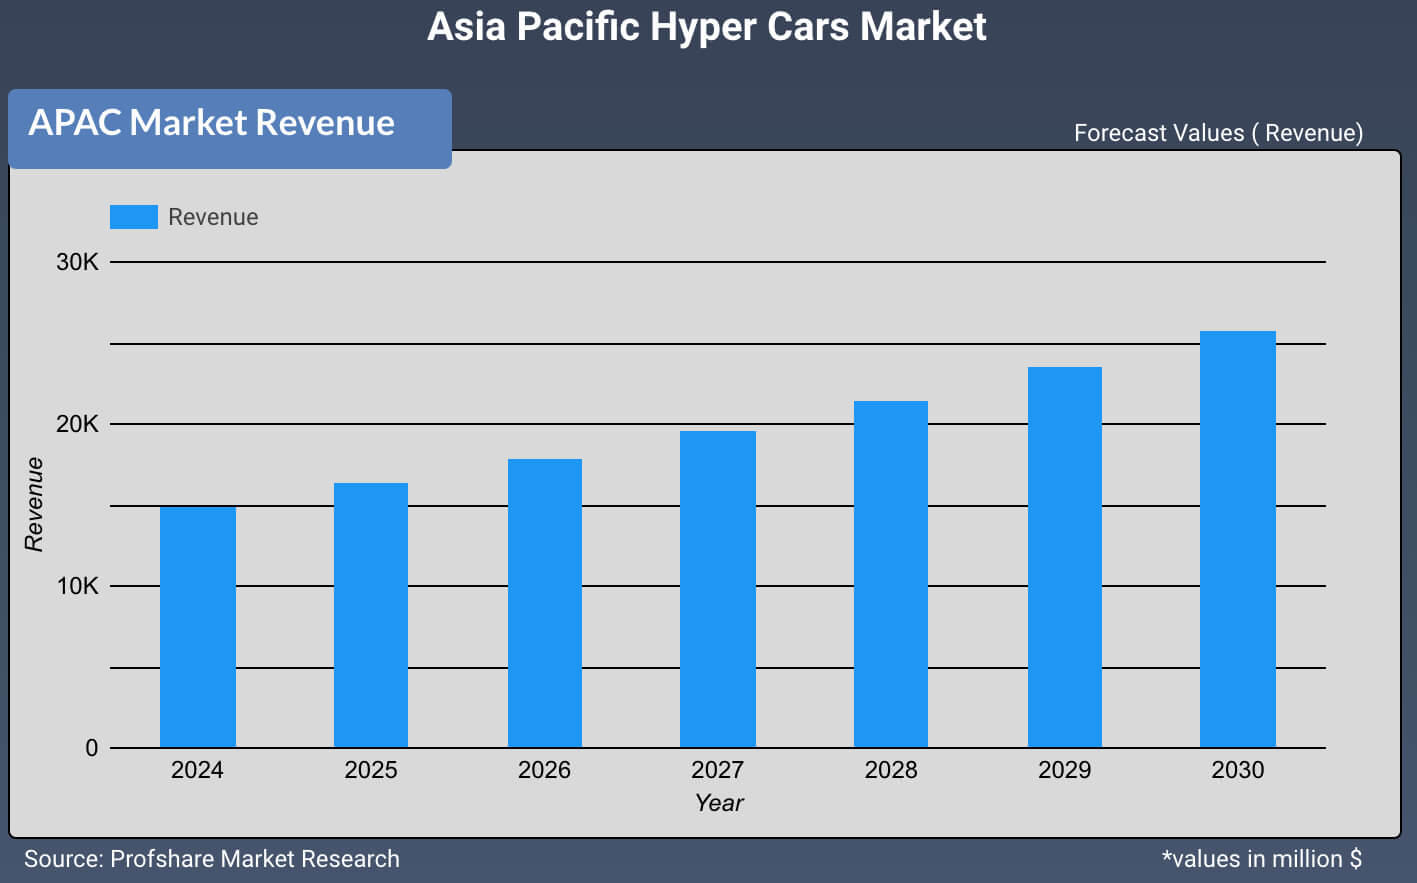 Asia Pacific Hyper Cars Market